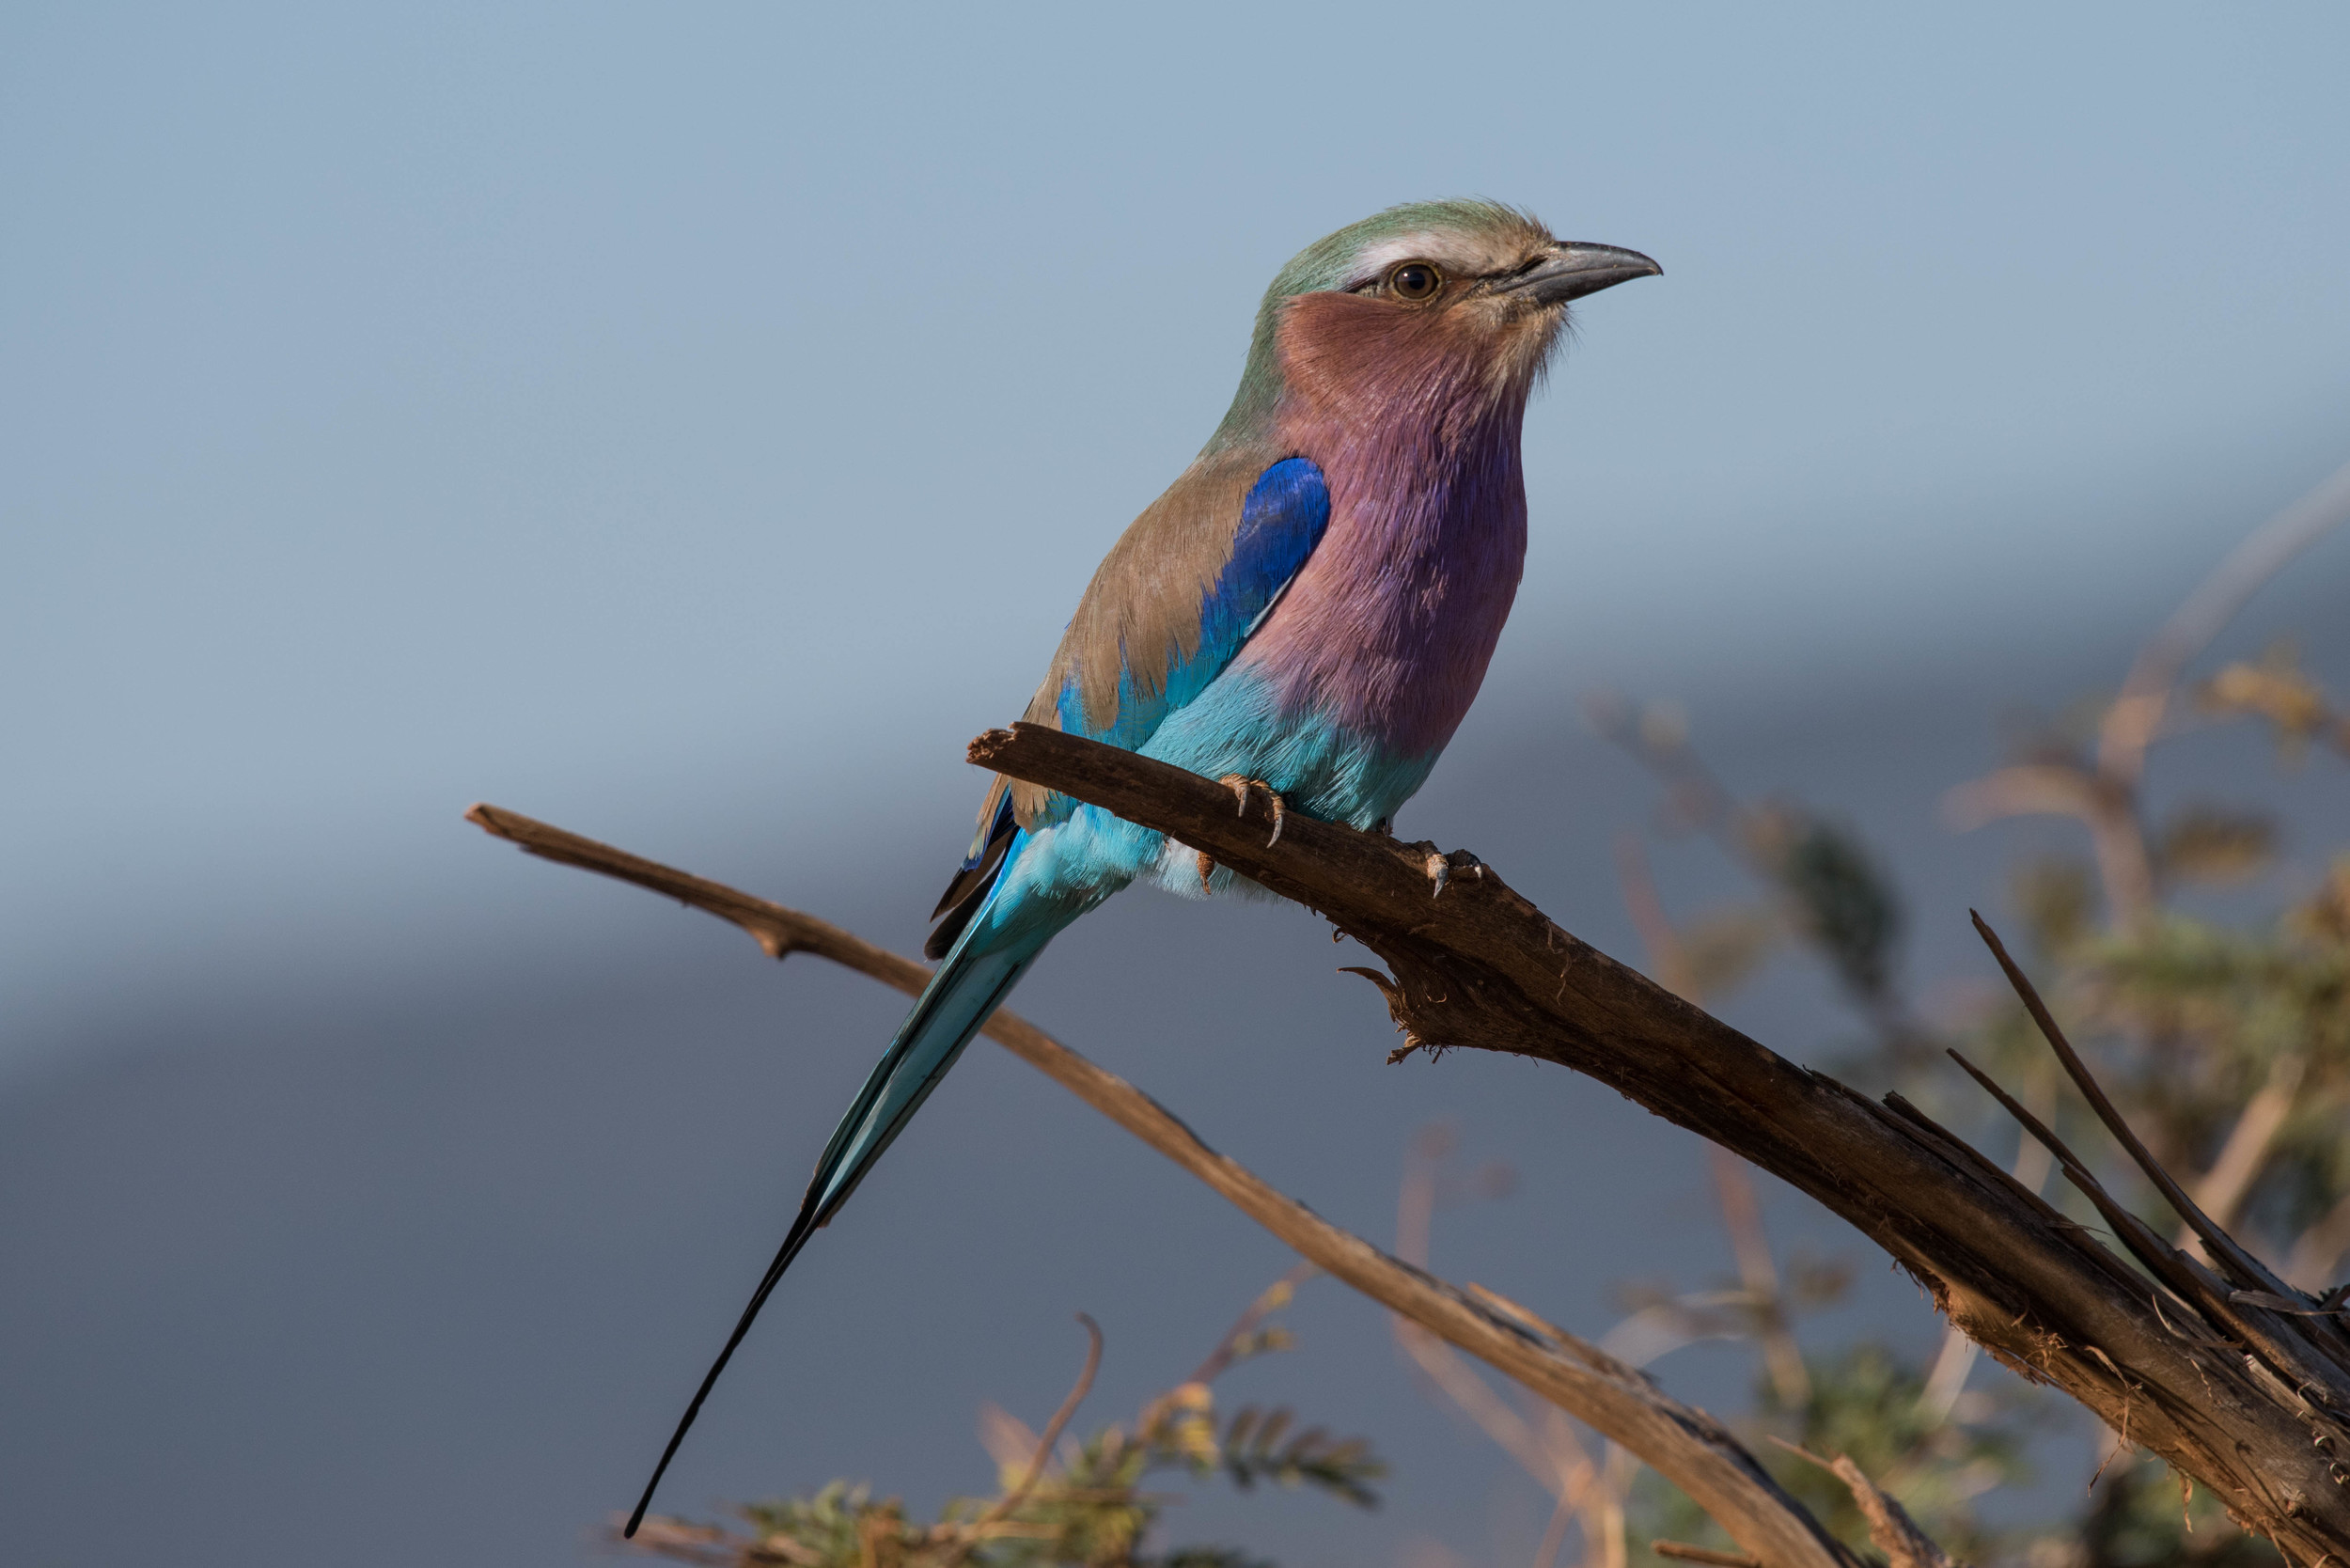 Lilac roller, Madikwe Game Reserve, South Africa